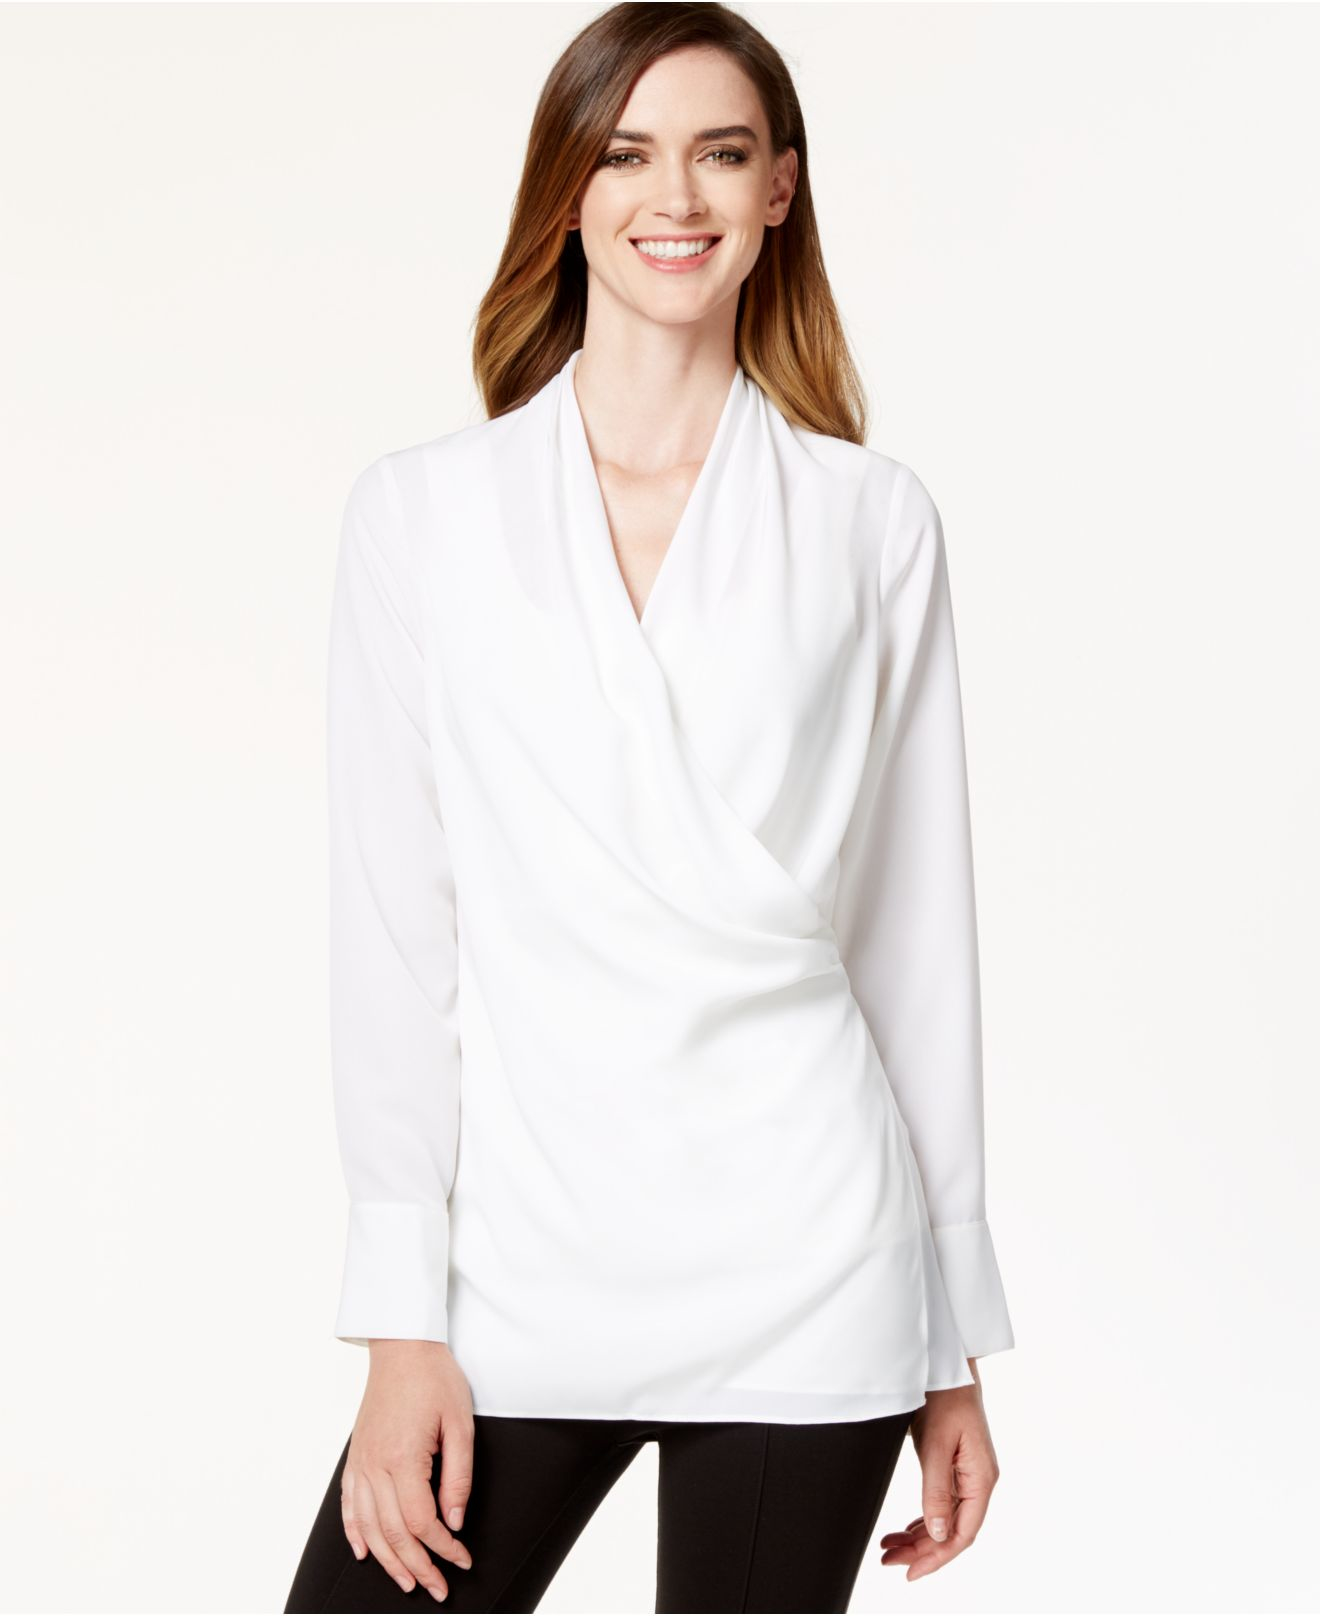 Lyst - Calvin Klein Crossover Hardware Tunic Blouse in White